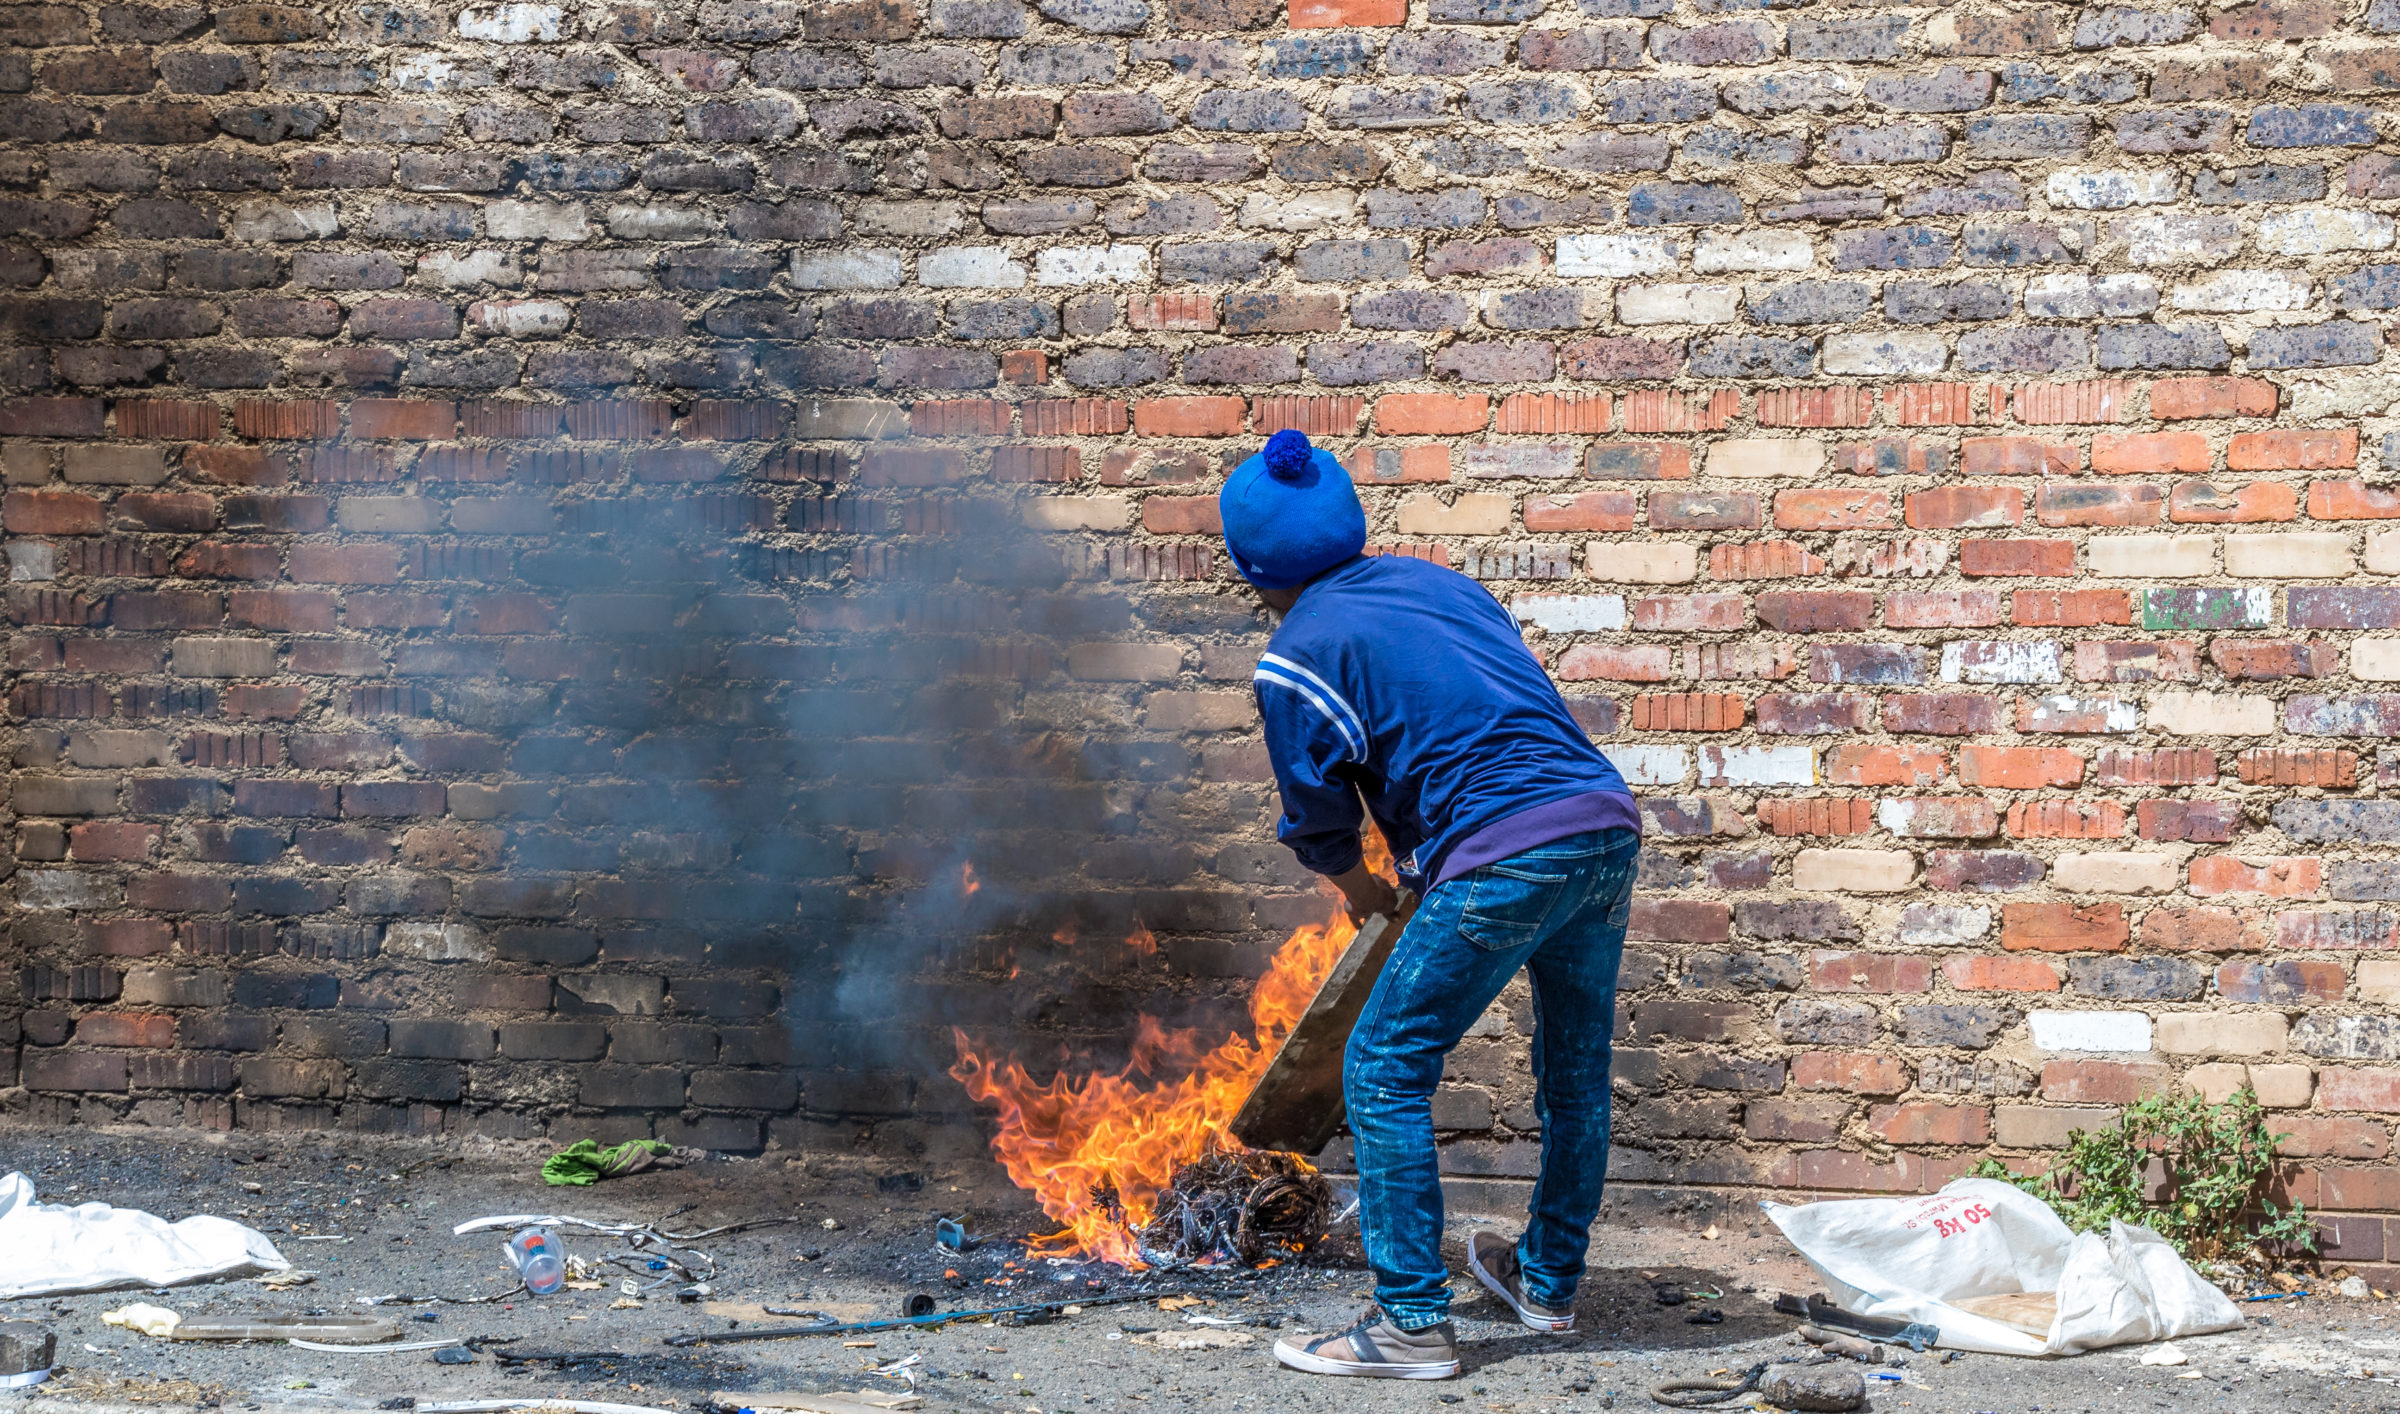 A homeless man in making a fire from rubbish to keep warm image in landscape format with copy space